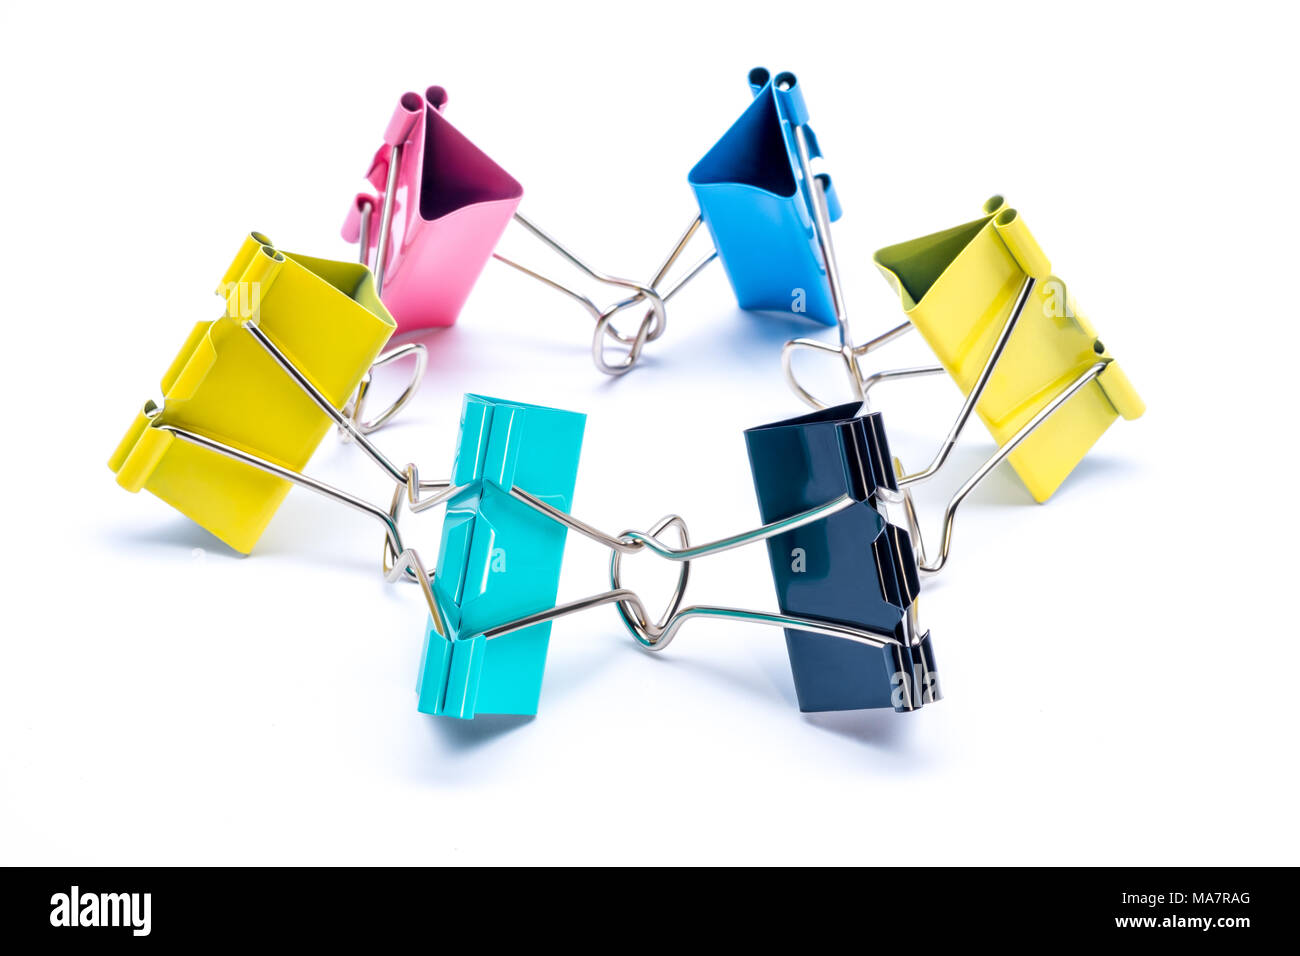 Creative stationery composition. Binder clips on white background. Office and school supply. Stock Photo